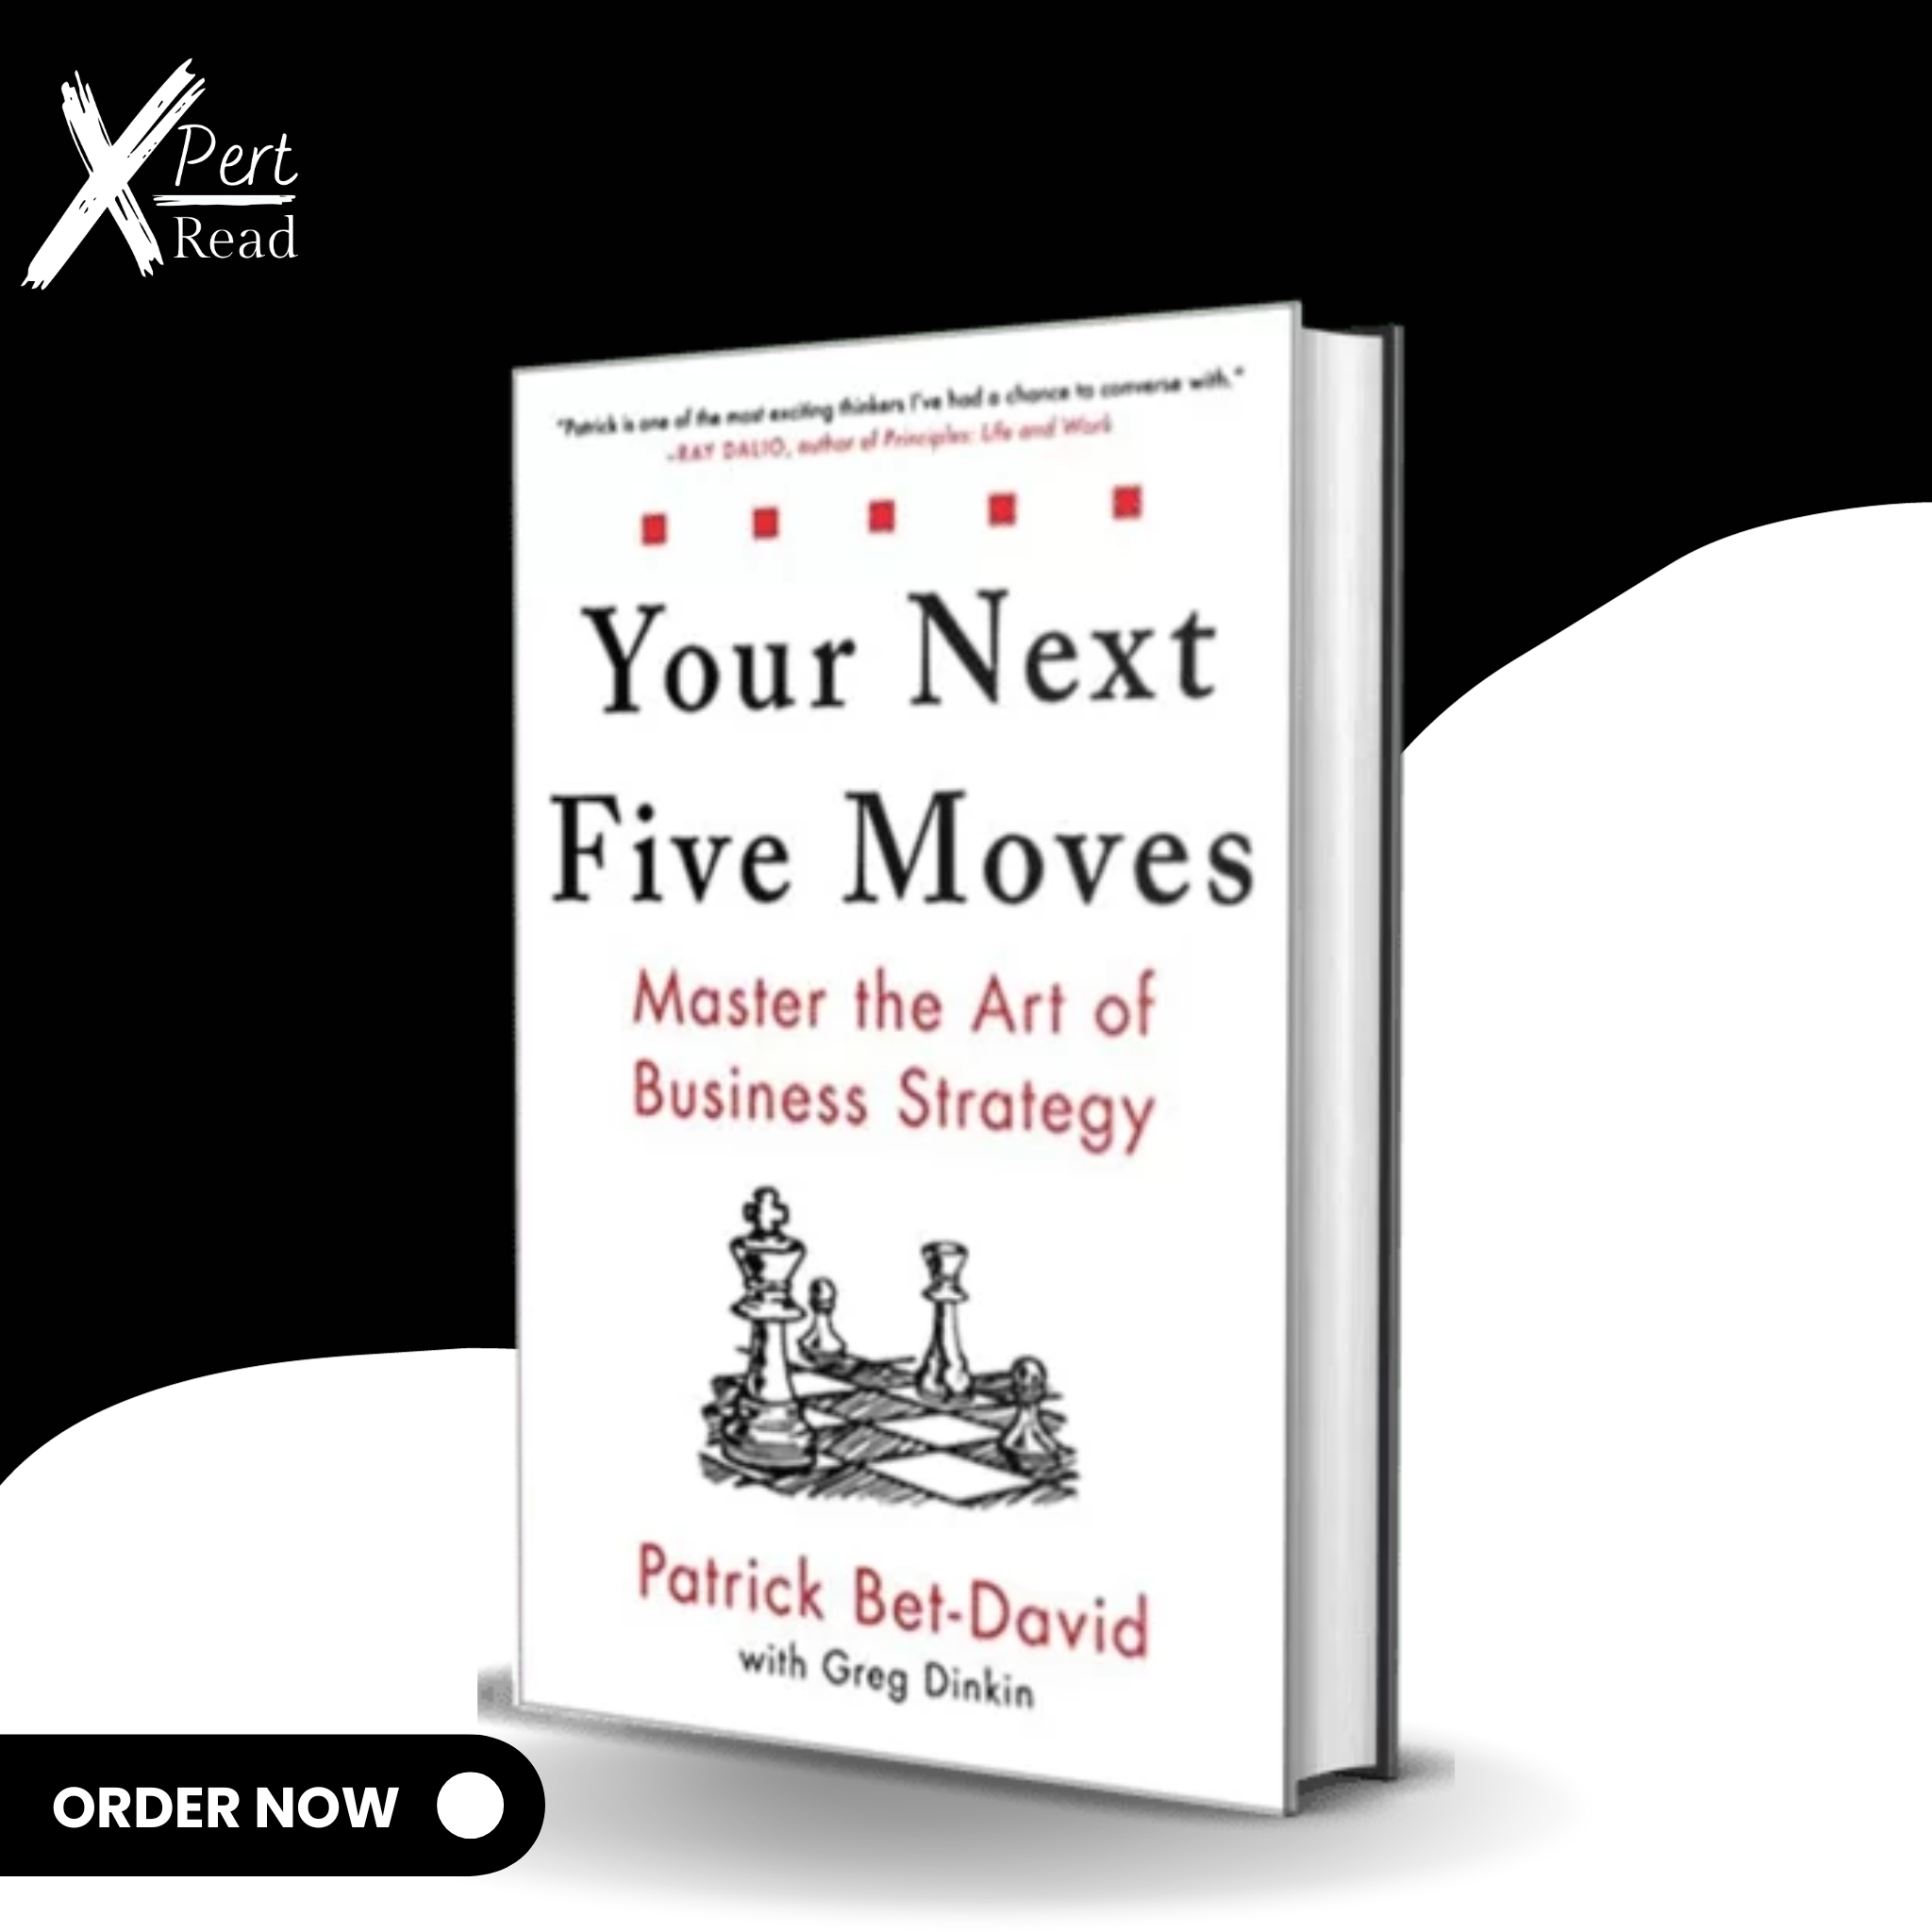 Your Next Five Moves By Patrick Bet-David (Hardcover)